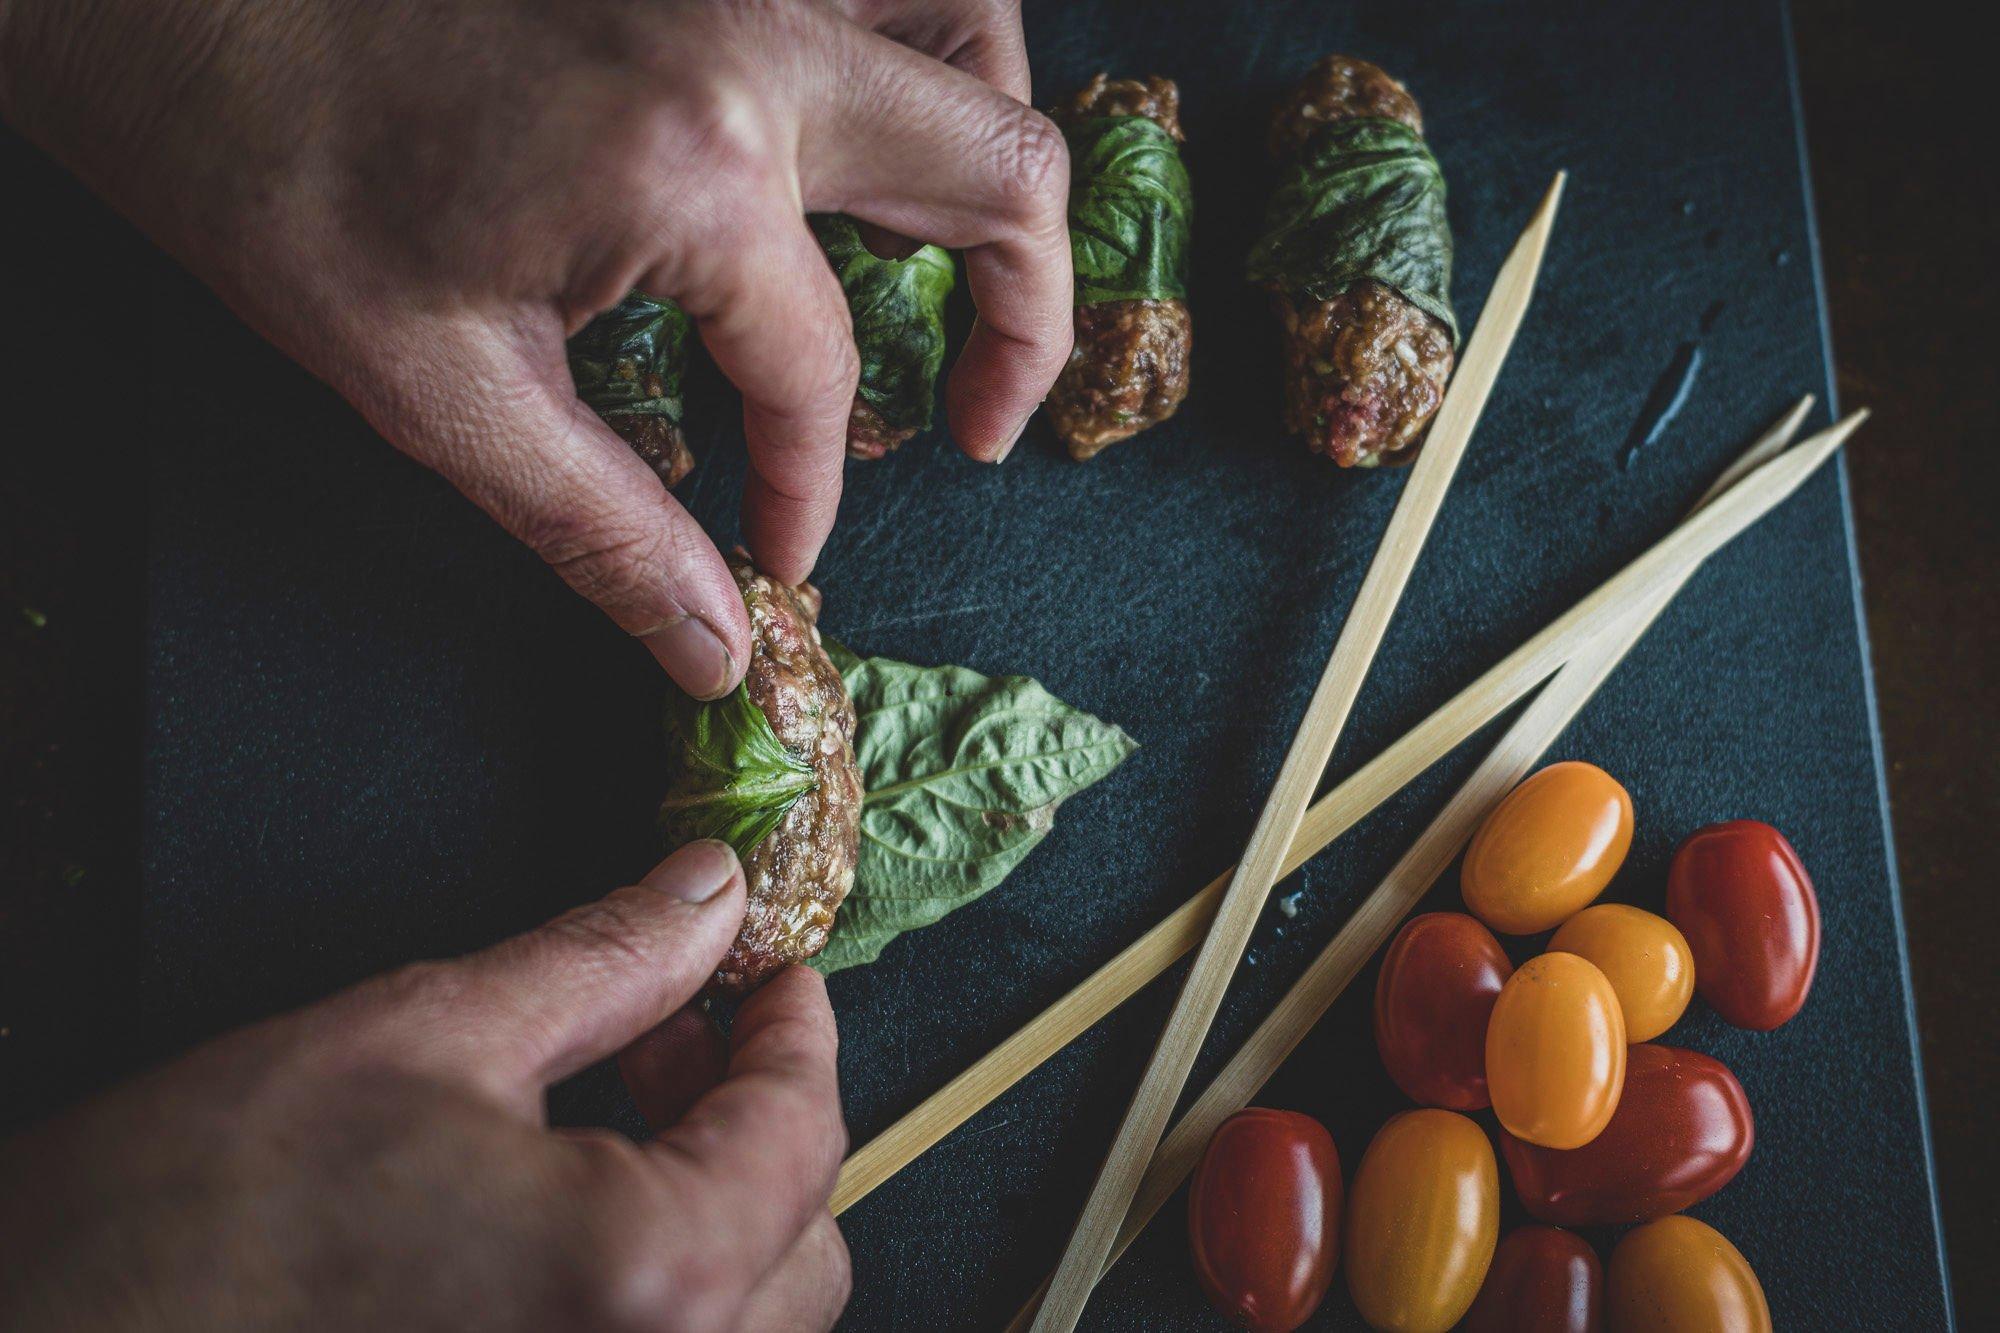 Roll the meat mixture in a mint or basil leaf. Image by Grit Media